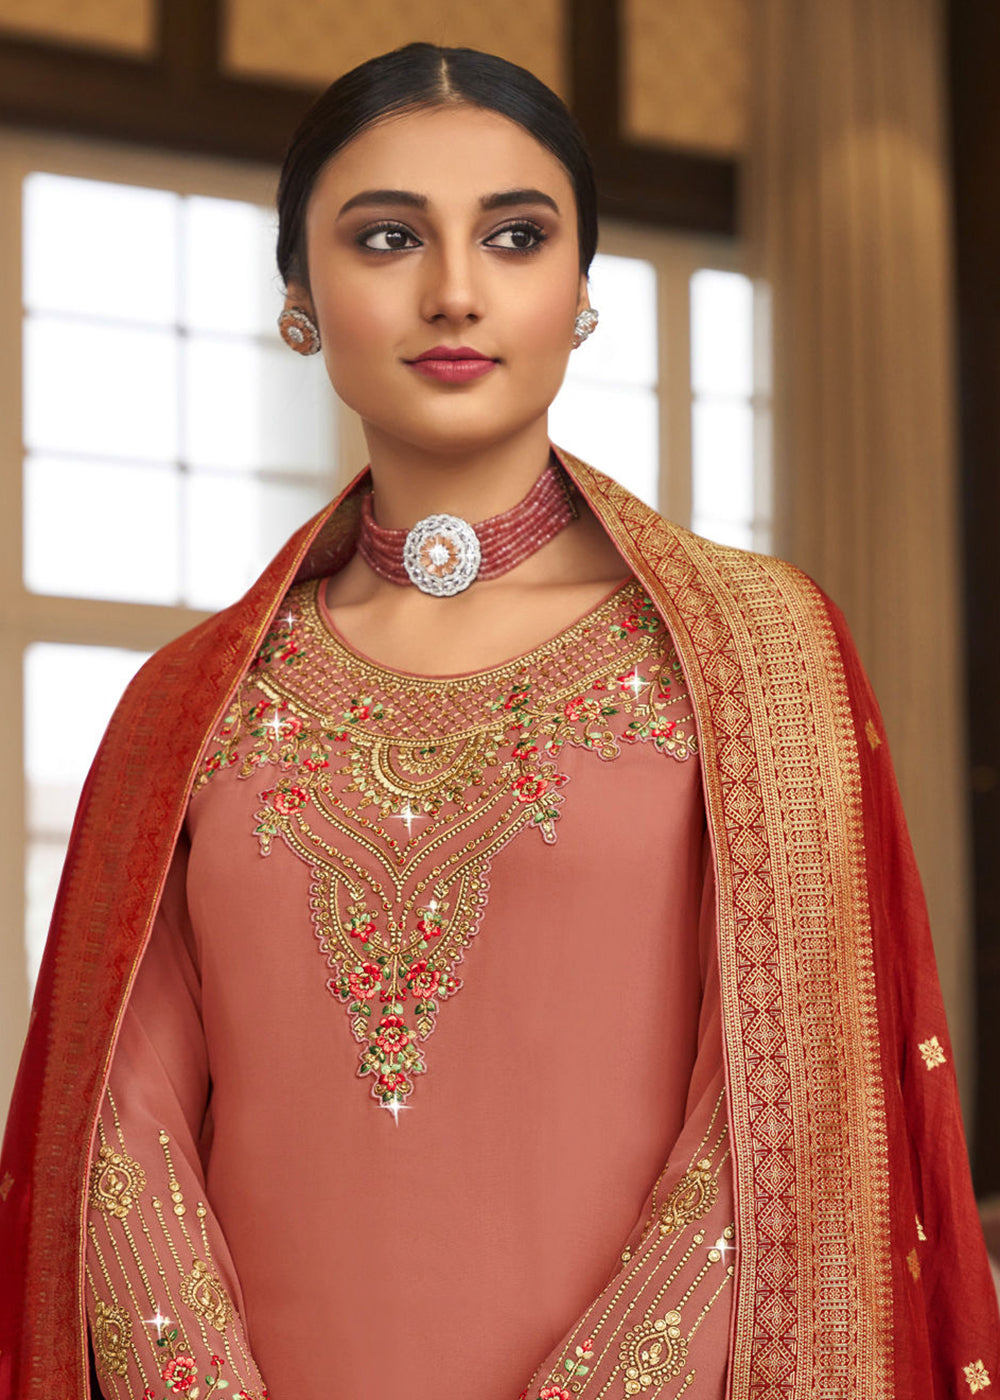 Buy Now Wedding Party Incredible Dusty Pink Thread & Zari Salwar Suit Online in USA, UK, Canada & Worldwide at Empress Clothing. 